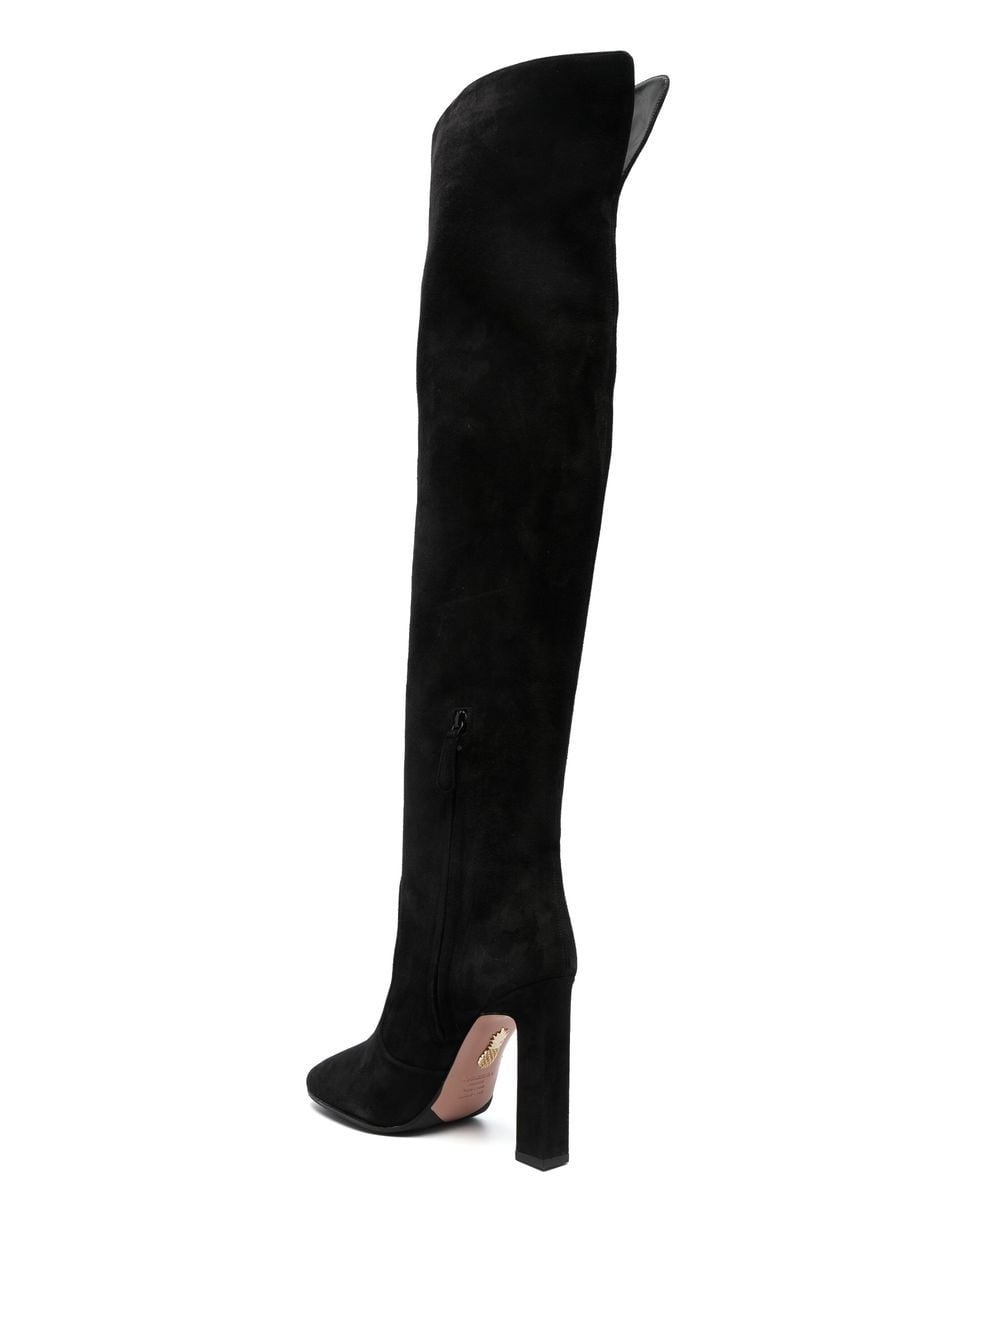 130mm knee-high suede boots - 3